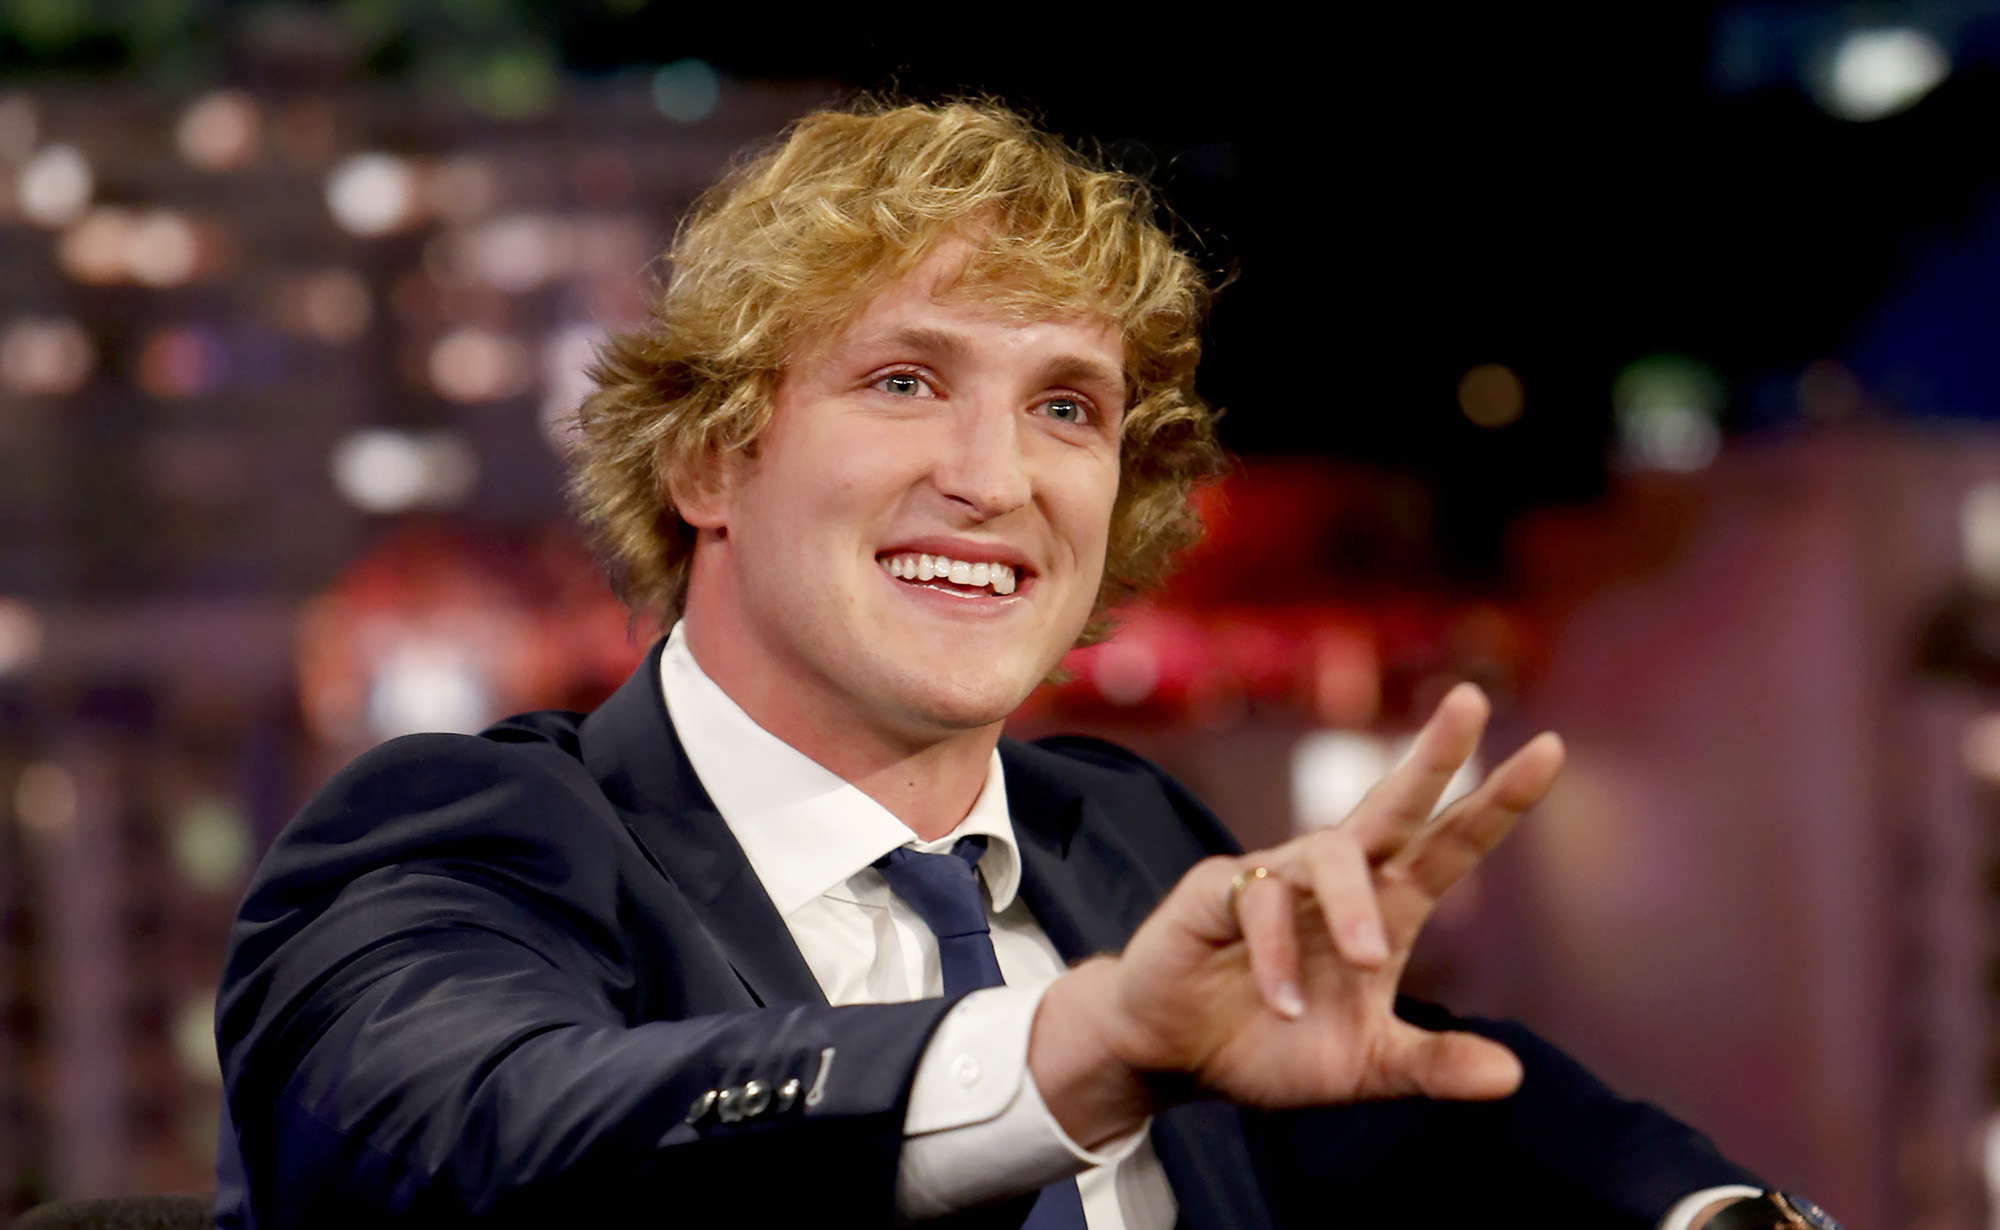 Logan Paul Is Not Banned from Vine 2, Tweets Are Completely Fake